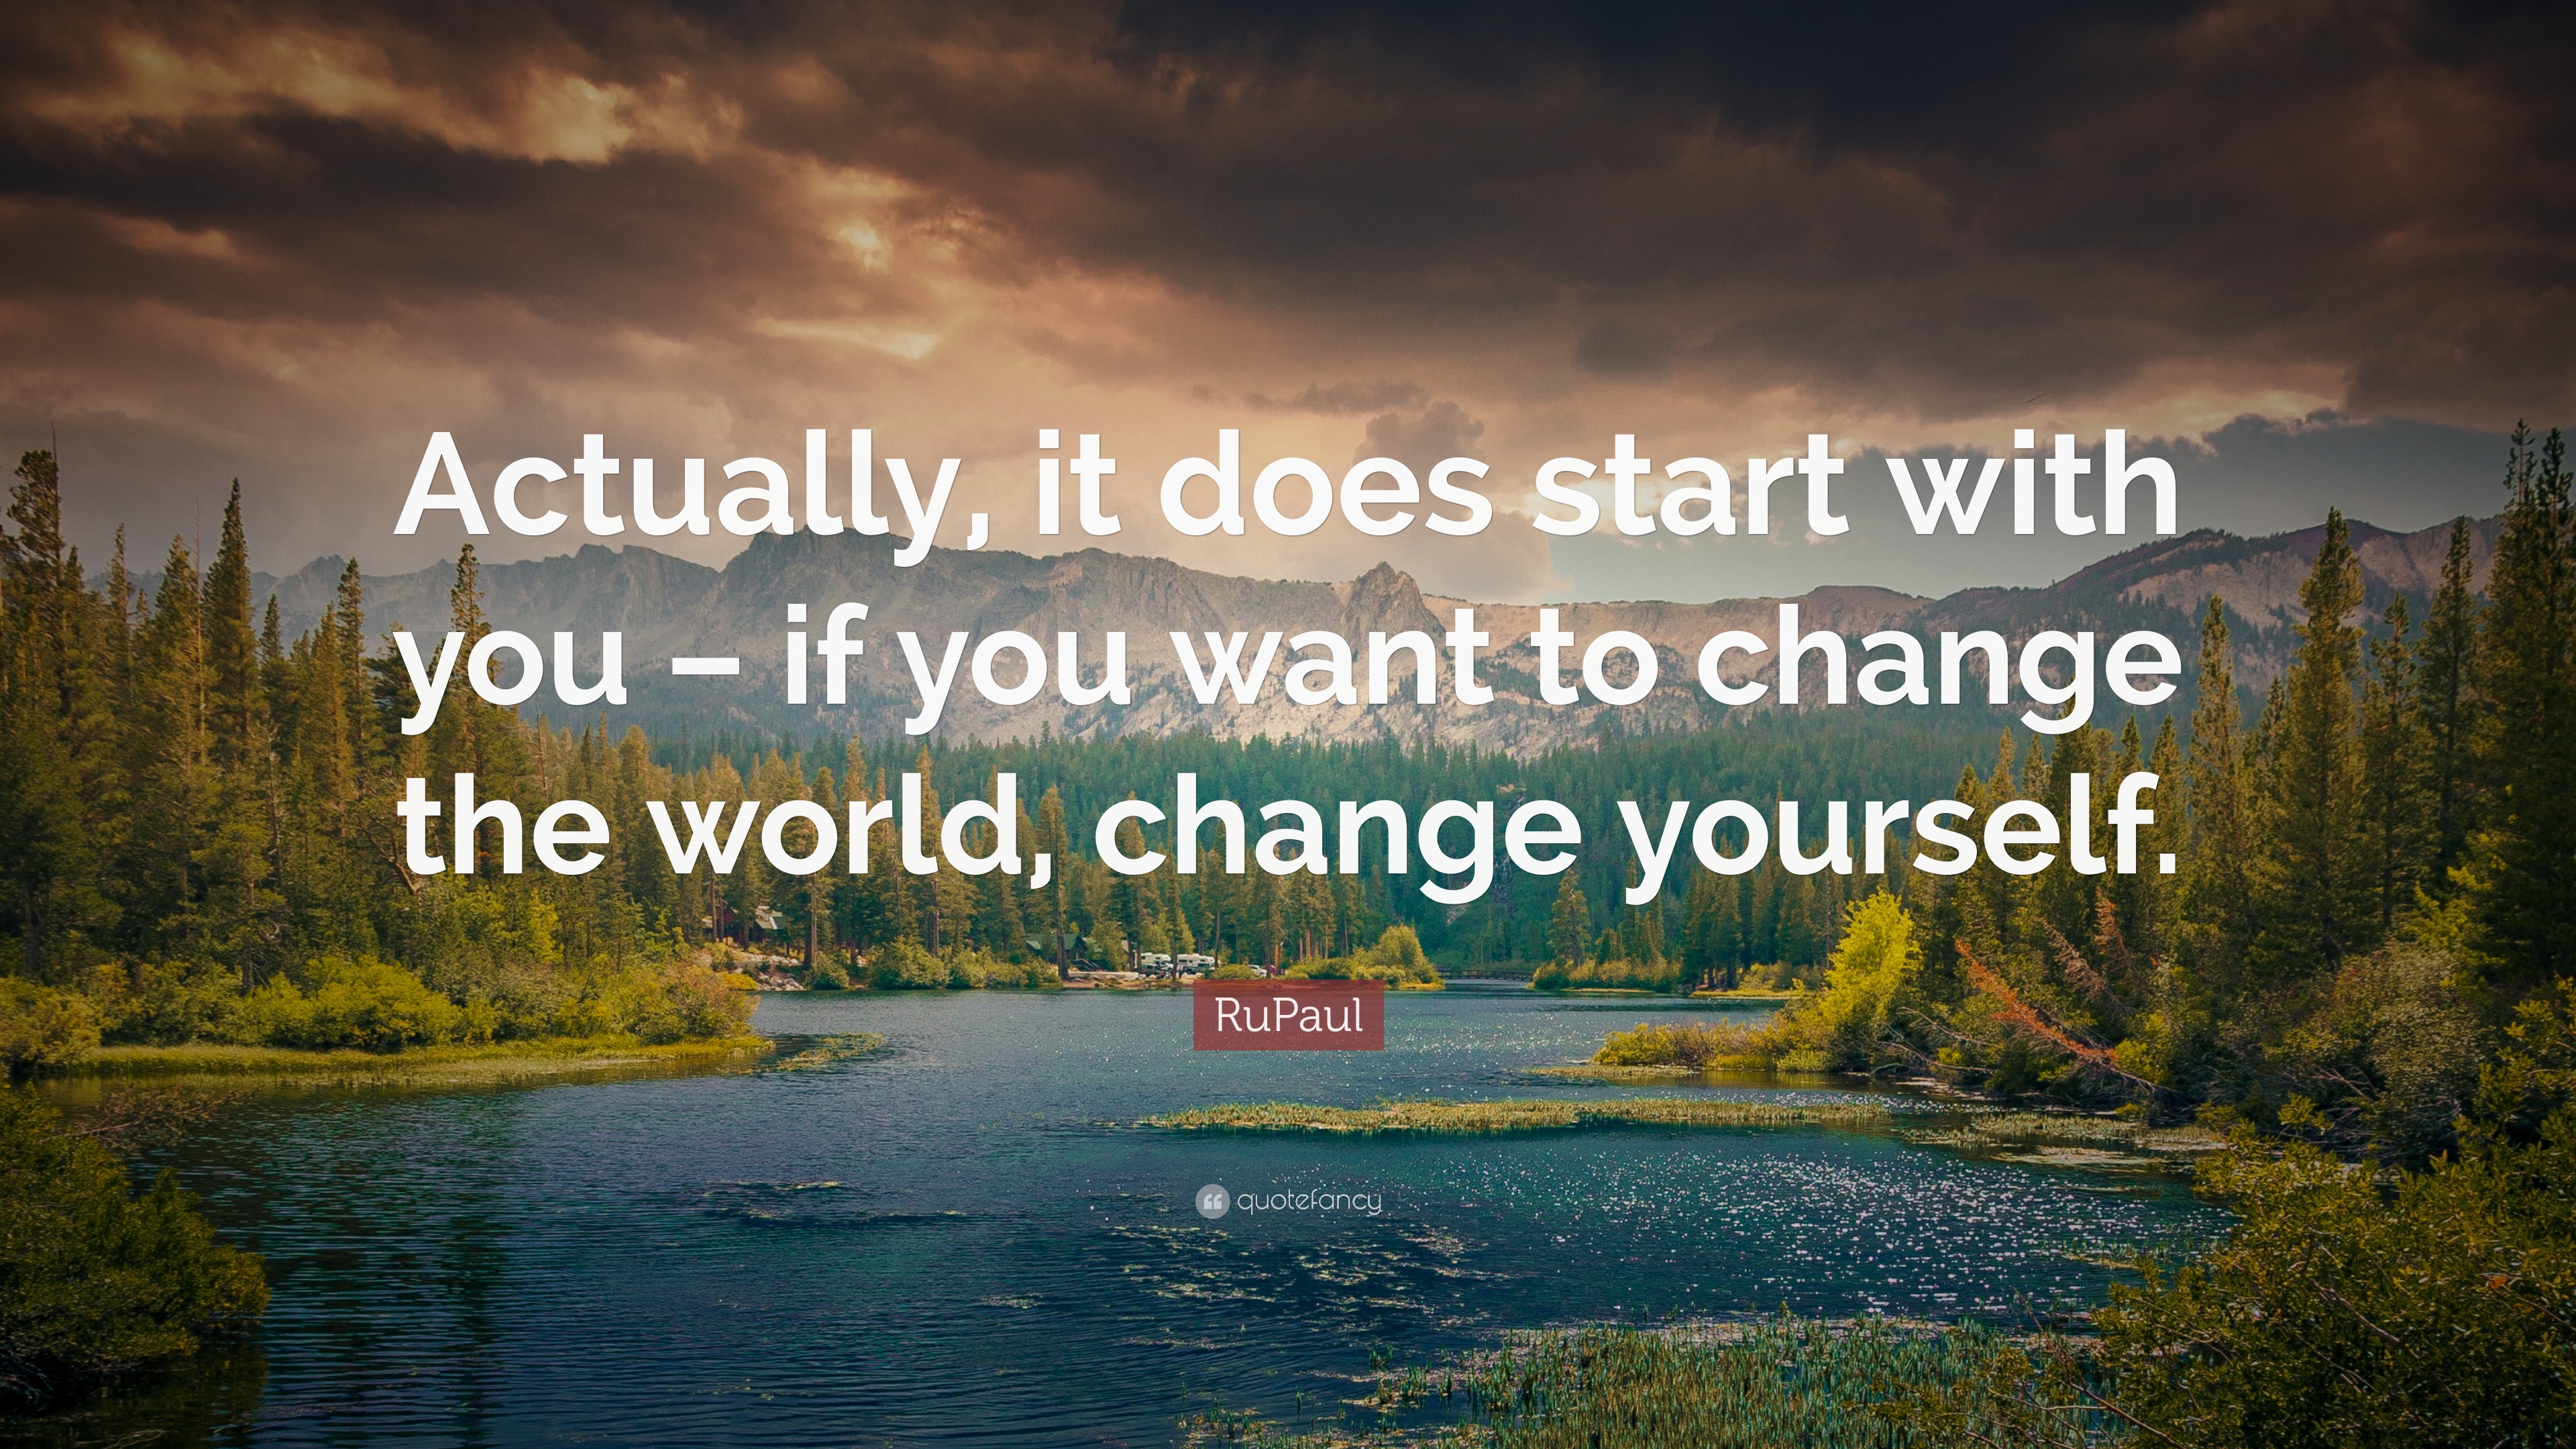 RuPaul Quote: “Actually, it does start with you – if you want to change ...